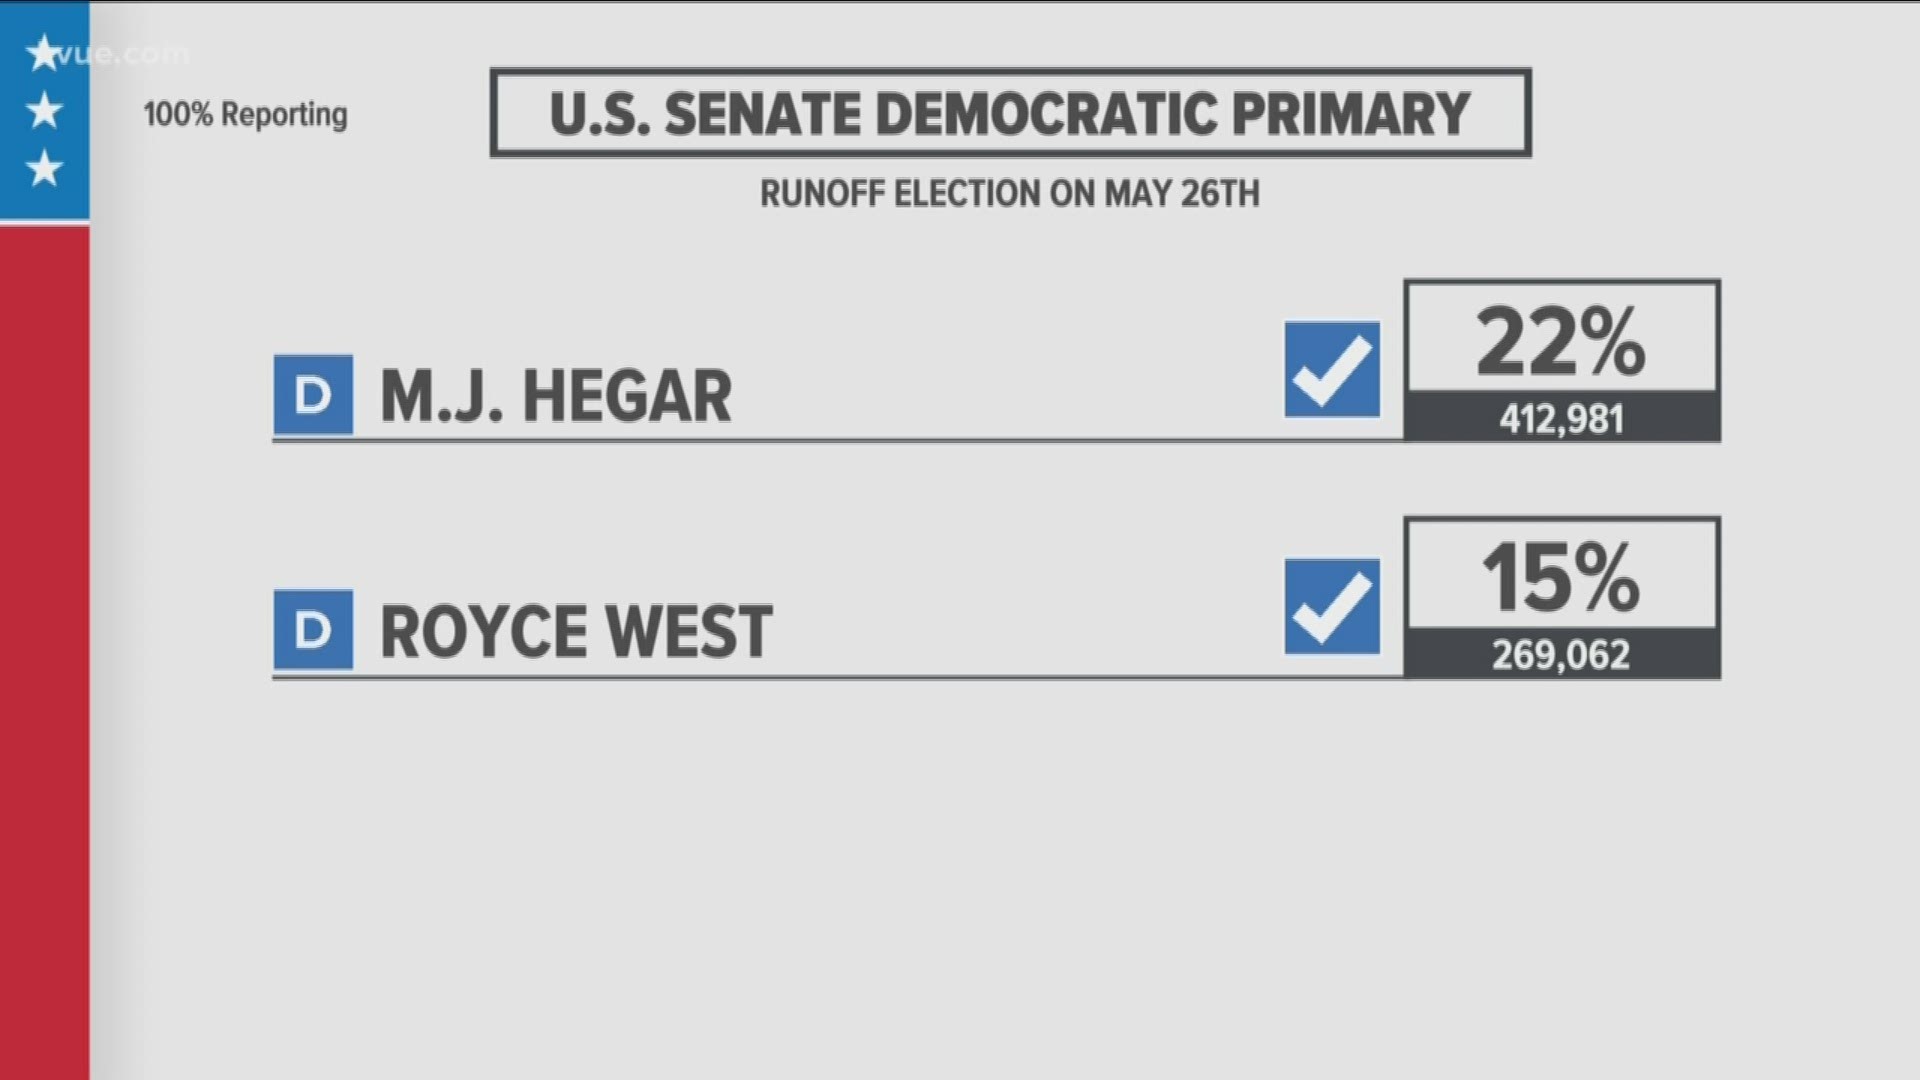 We now know which two Texas Democrats will face each other in a runoff in the U.S. Senate primary.